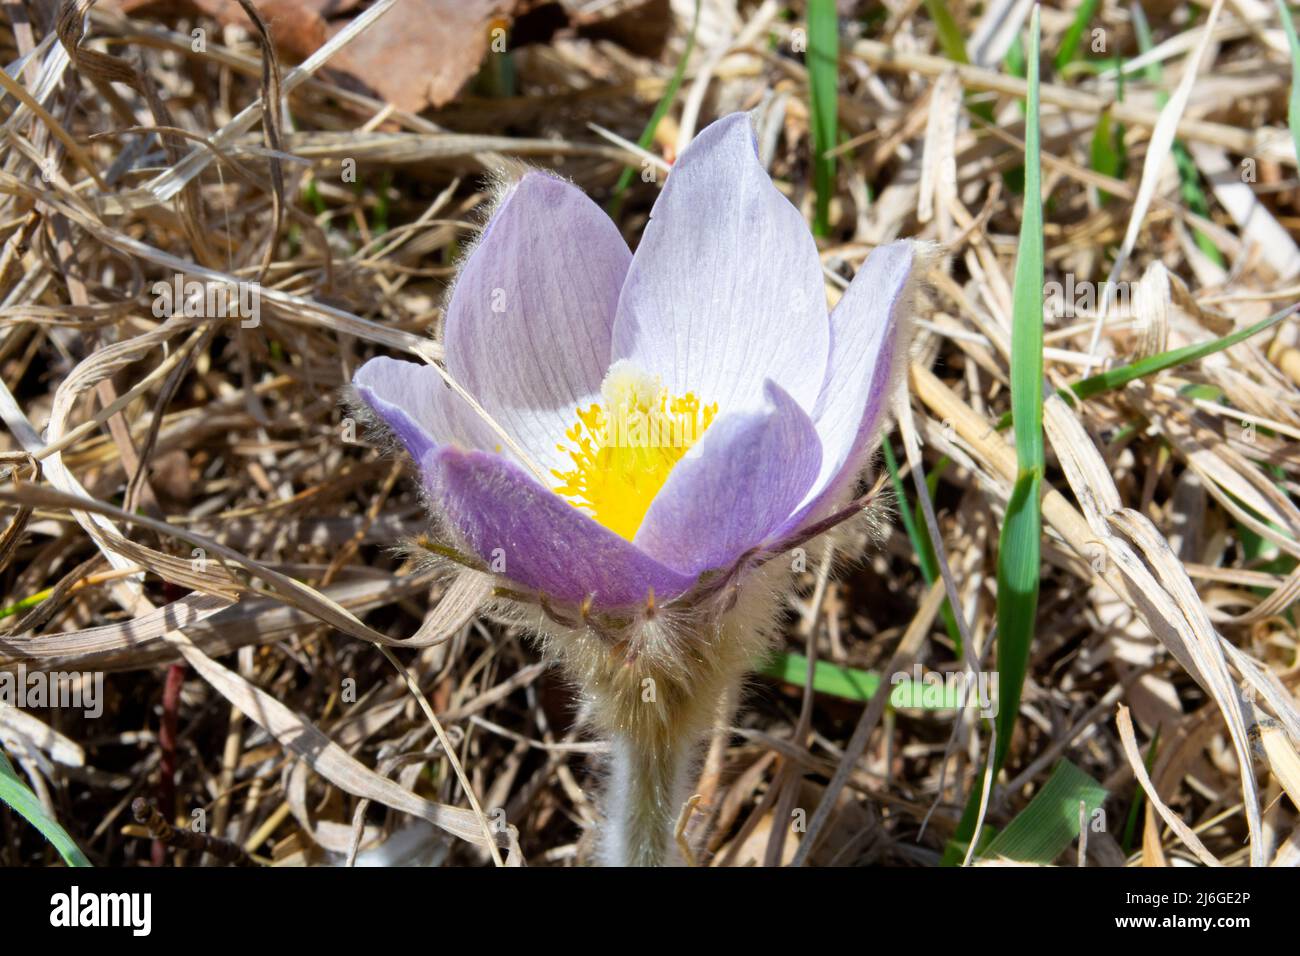 Prairie Crocus Blooming in Early Spring on the Prarie. Stock Photo